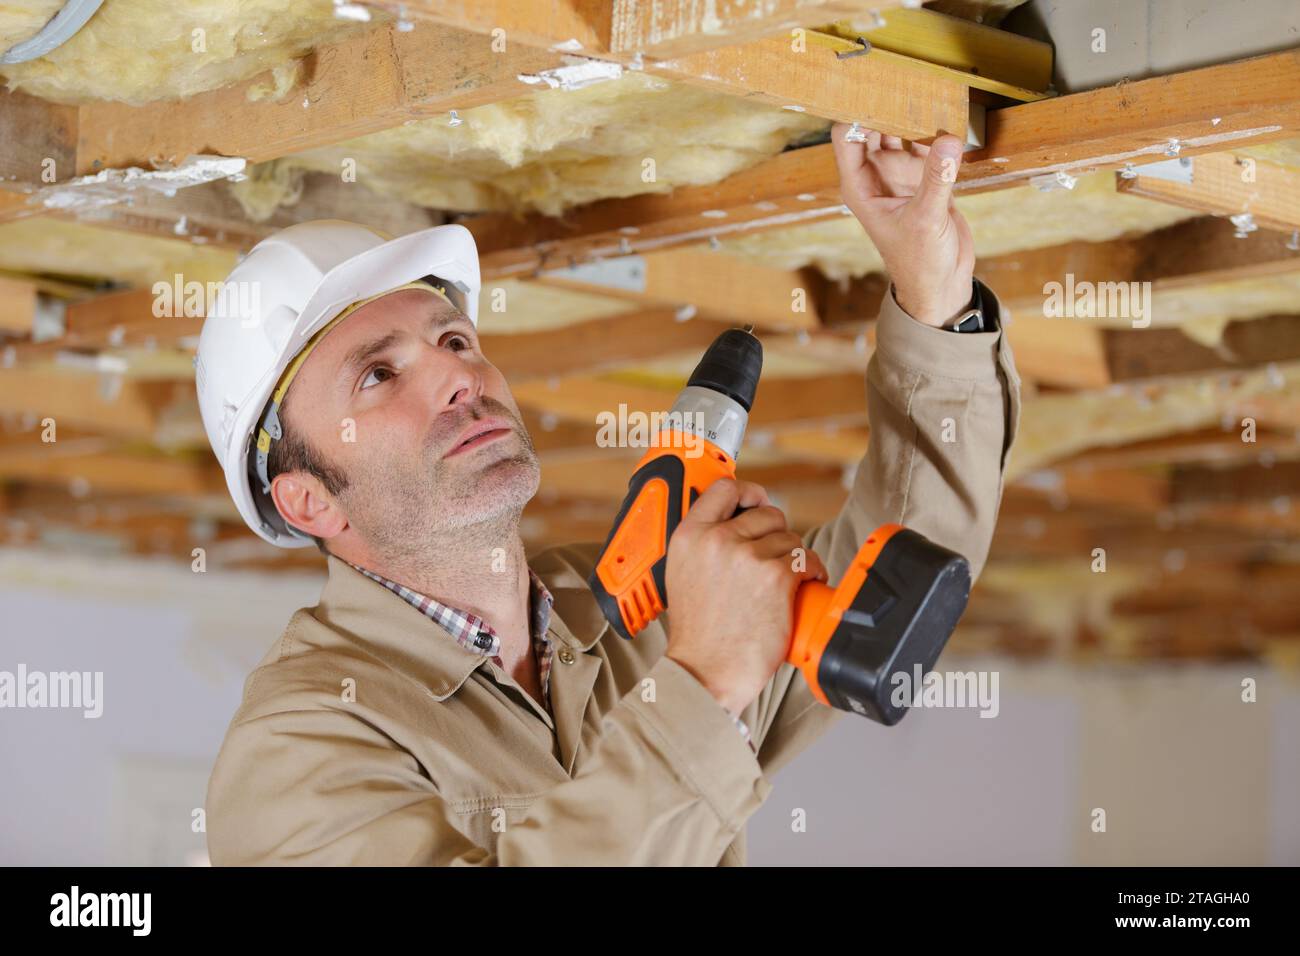 man drilling a hole in white ceiling Stock Photo